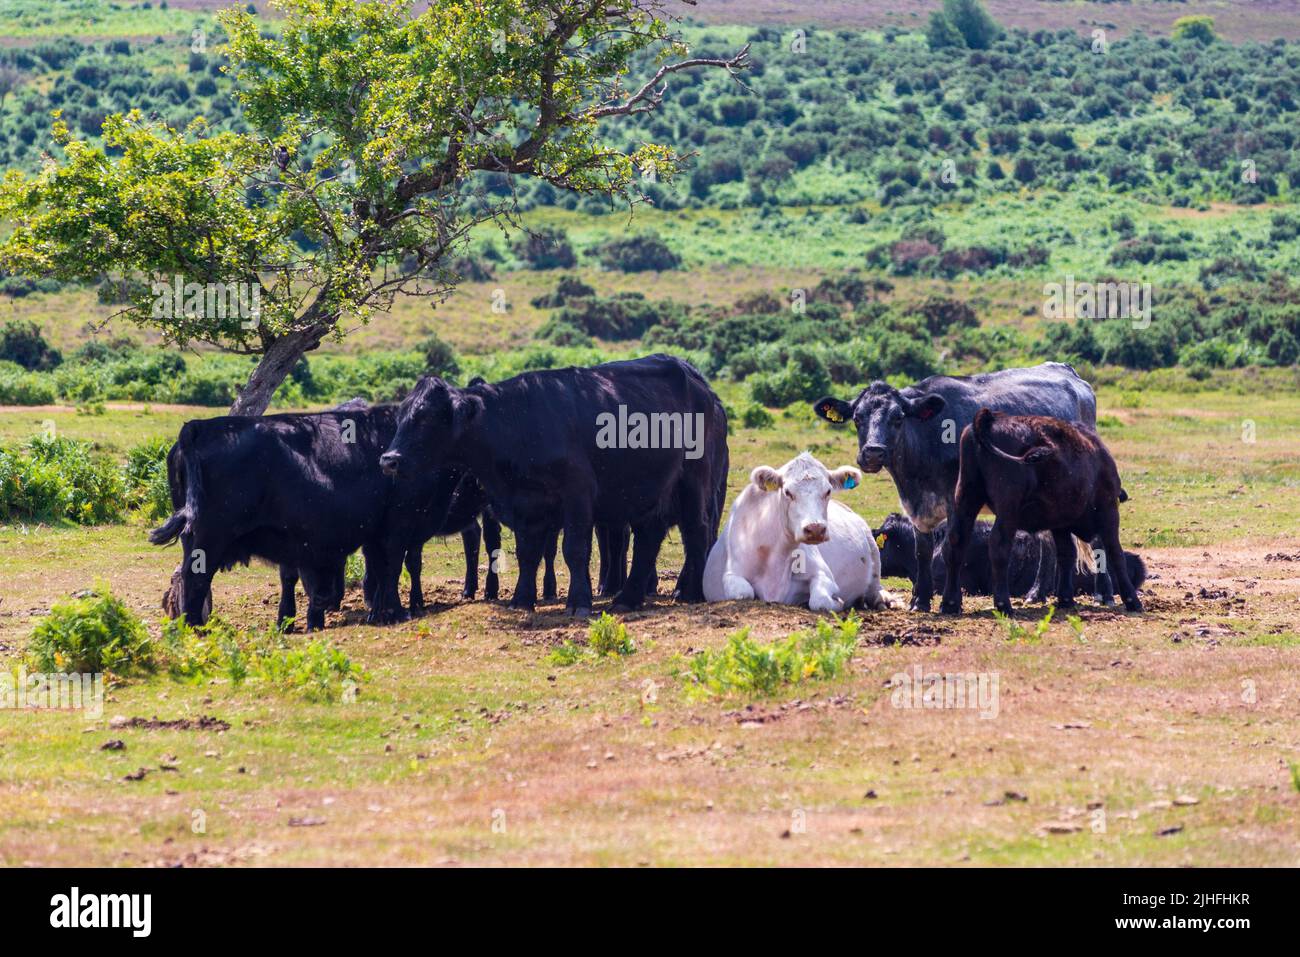 Godshill, Fordingbridge, New Forest, Hampshire, UK, 18th July 2022, Heatwaver: Temperature tops 30 degrees in the midday sun. A herd of cows rest and conserve energy in a landscape parched by the extreme hot and dry weather. Paul Biggins/Alamy Live News Stock Photo